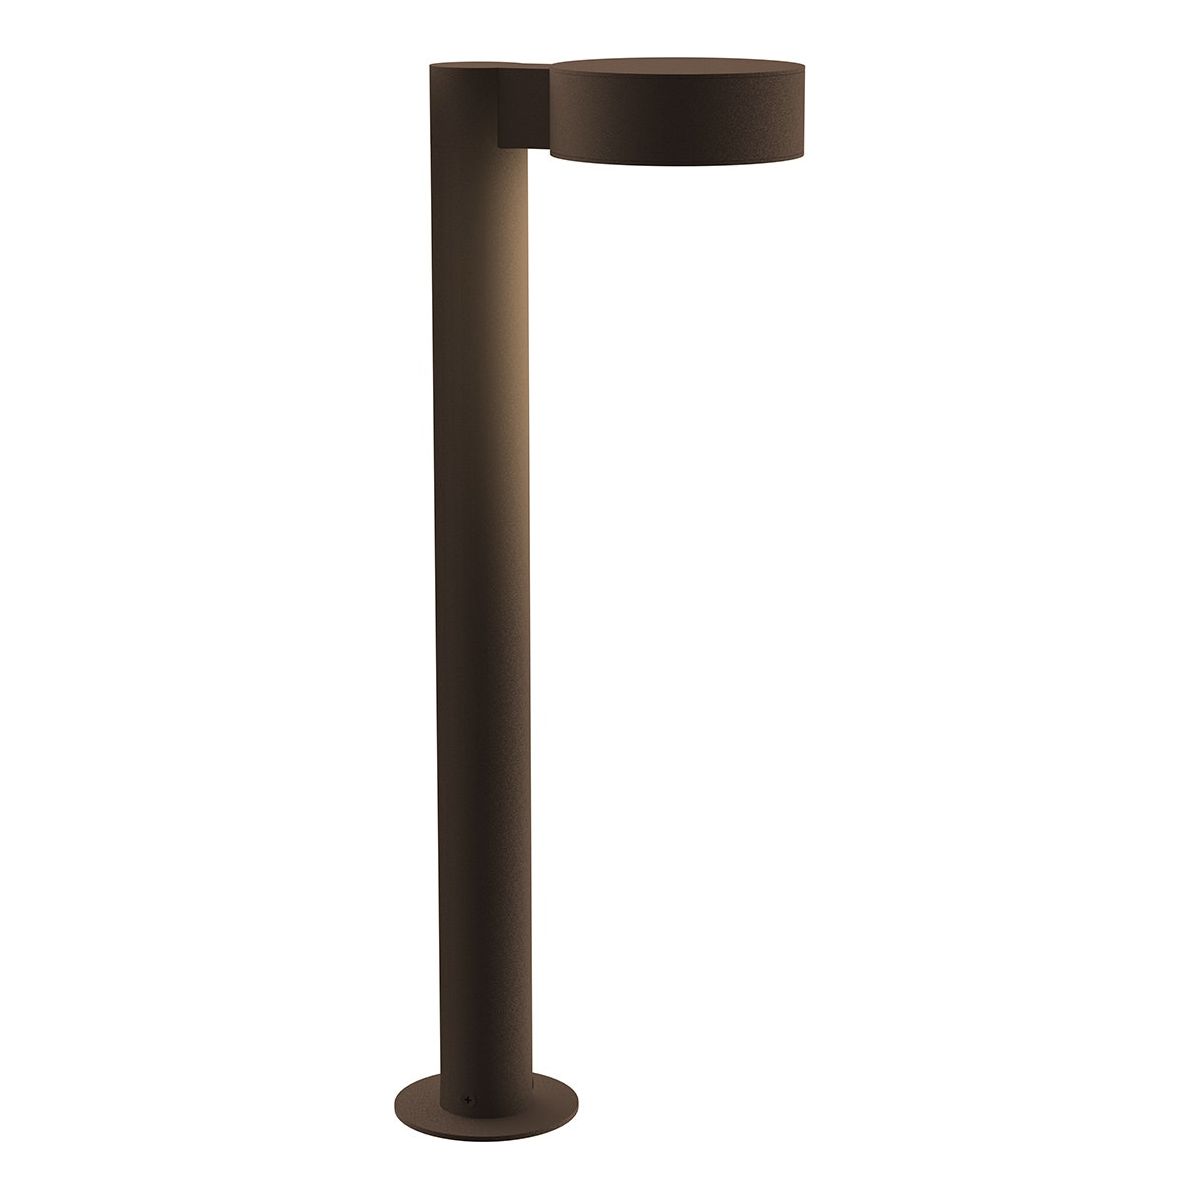 REALS 22" LED Bollard with Plate Cap and Plate Lens